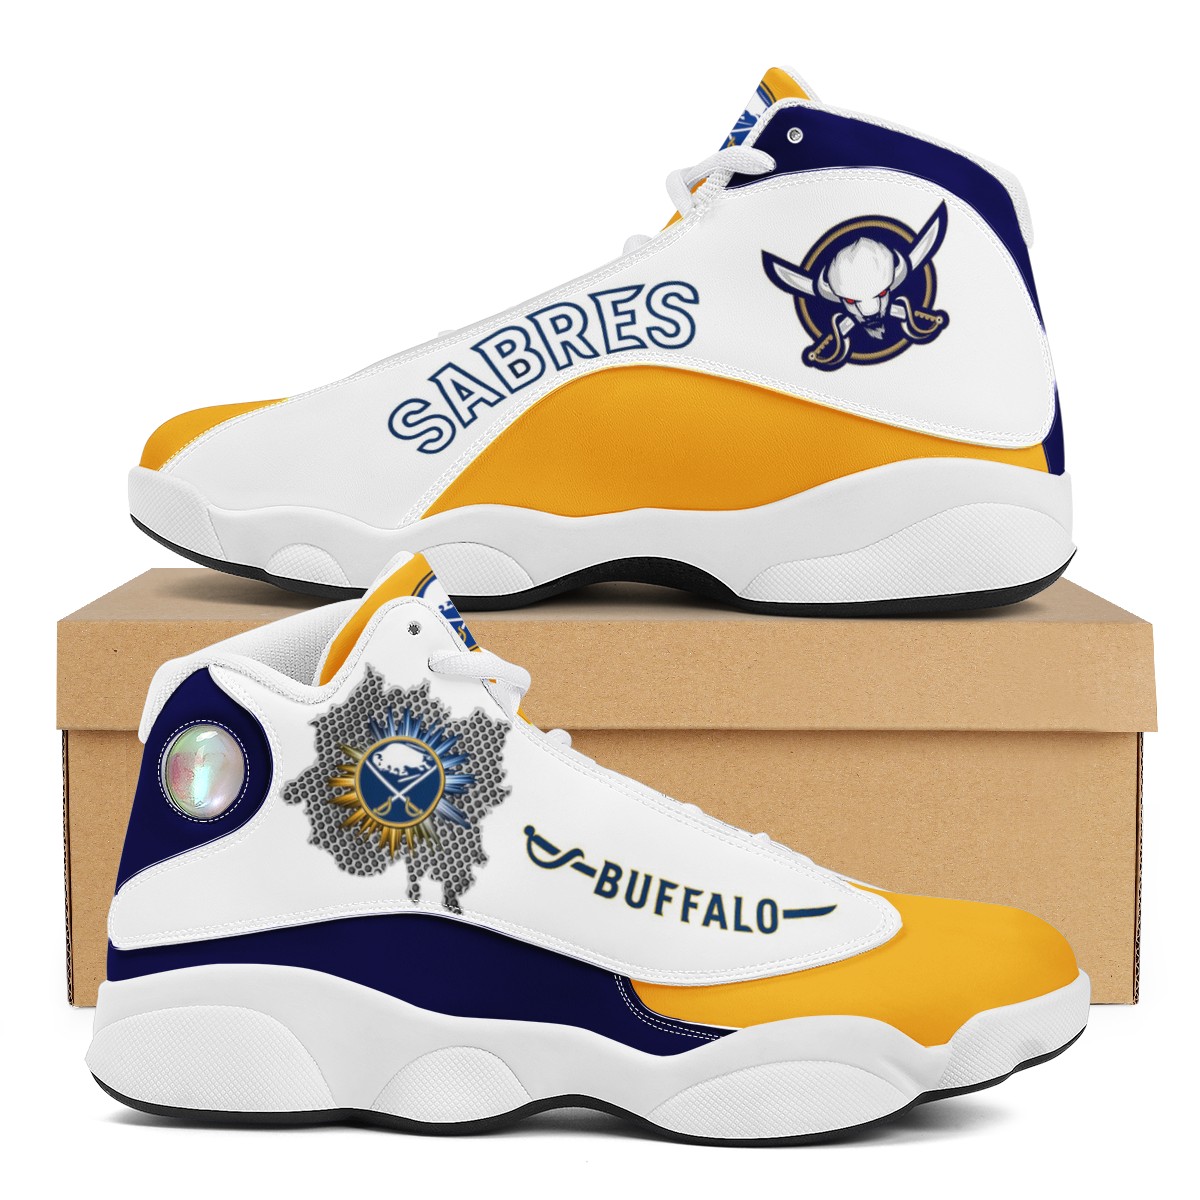 Men's Buffalo Sabres Limited Edition JD13 Sneakers 2001